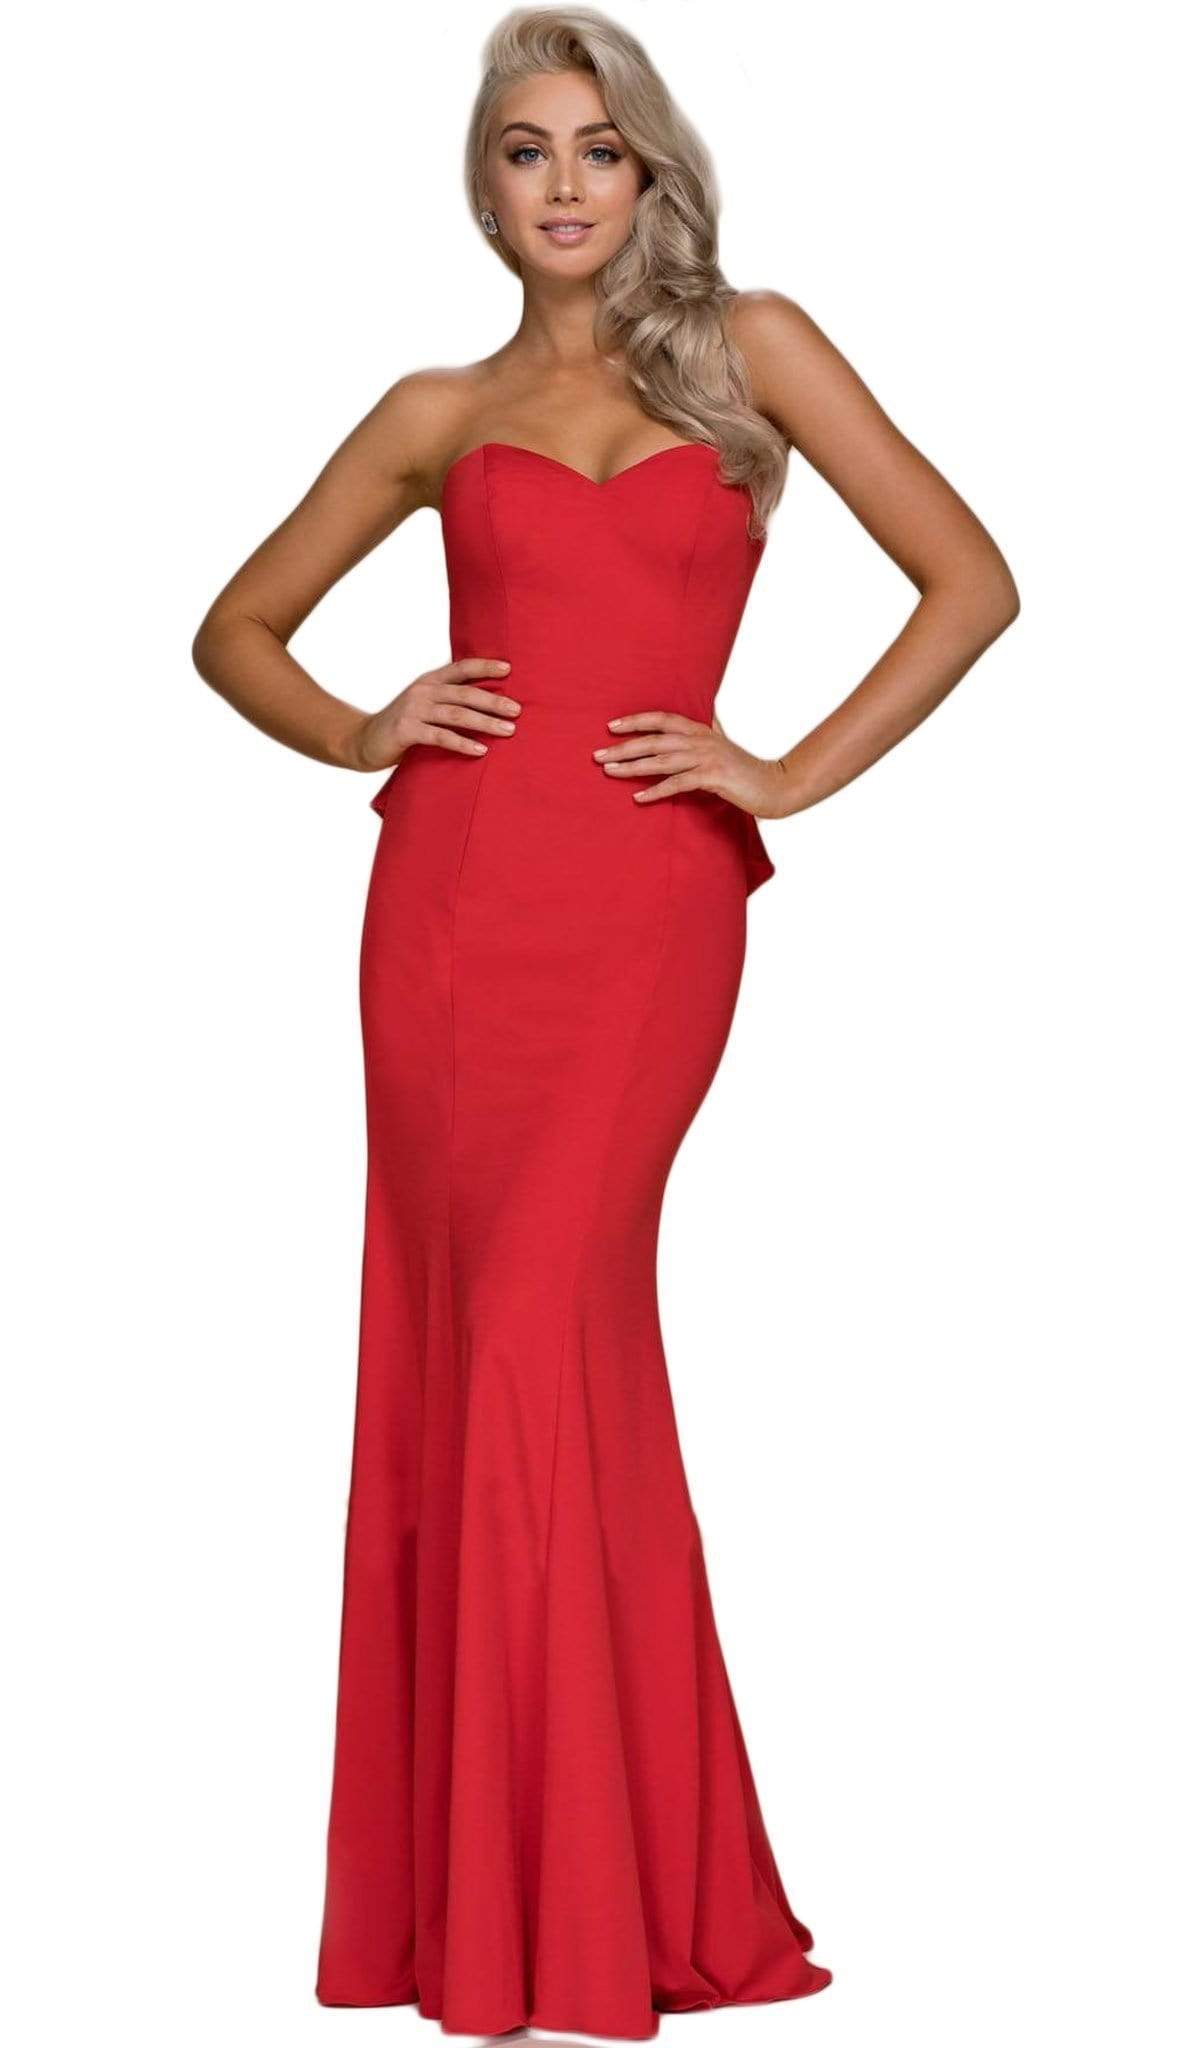 Nox Anabel - E002 Strapless Sweetheart Ruffled Sheath Dress Special Occasion Dress XS / Red